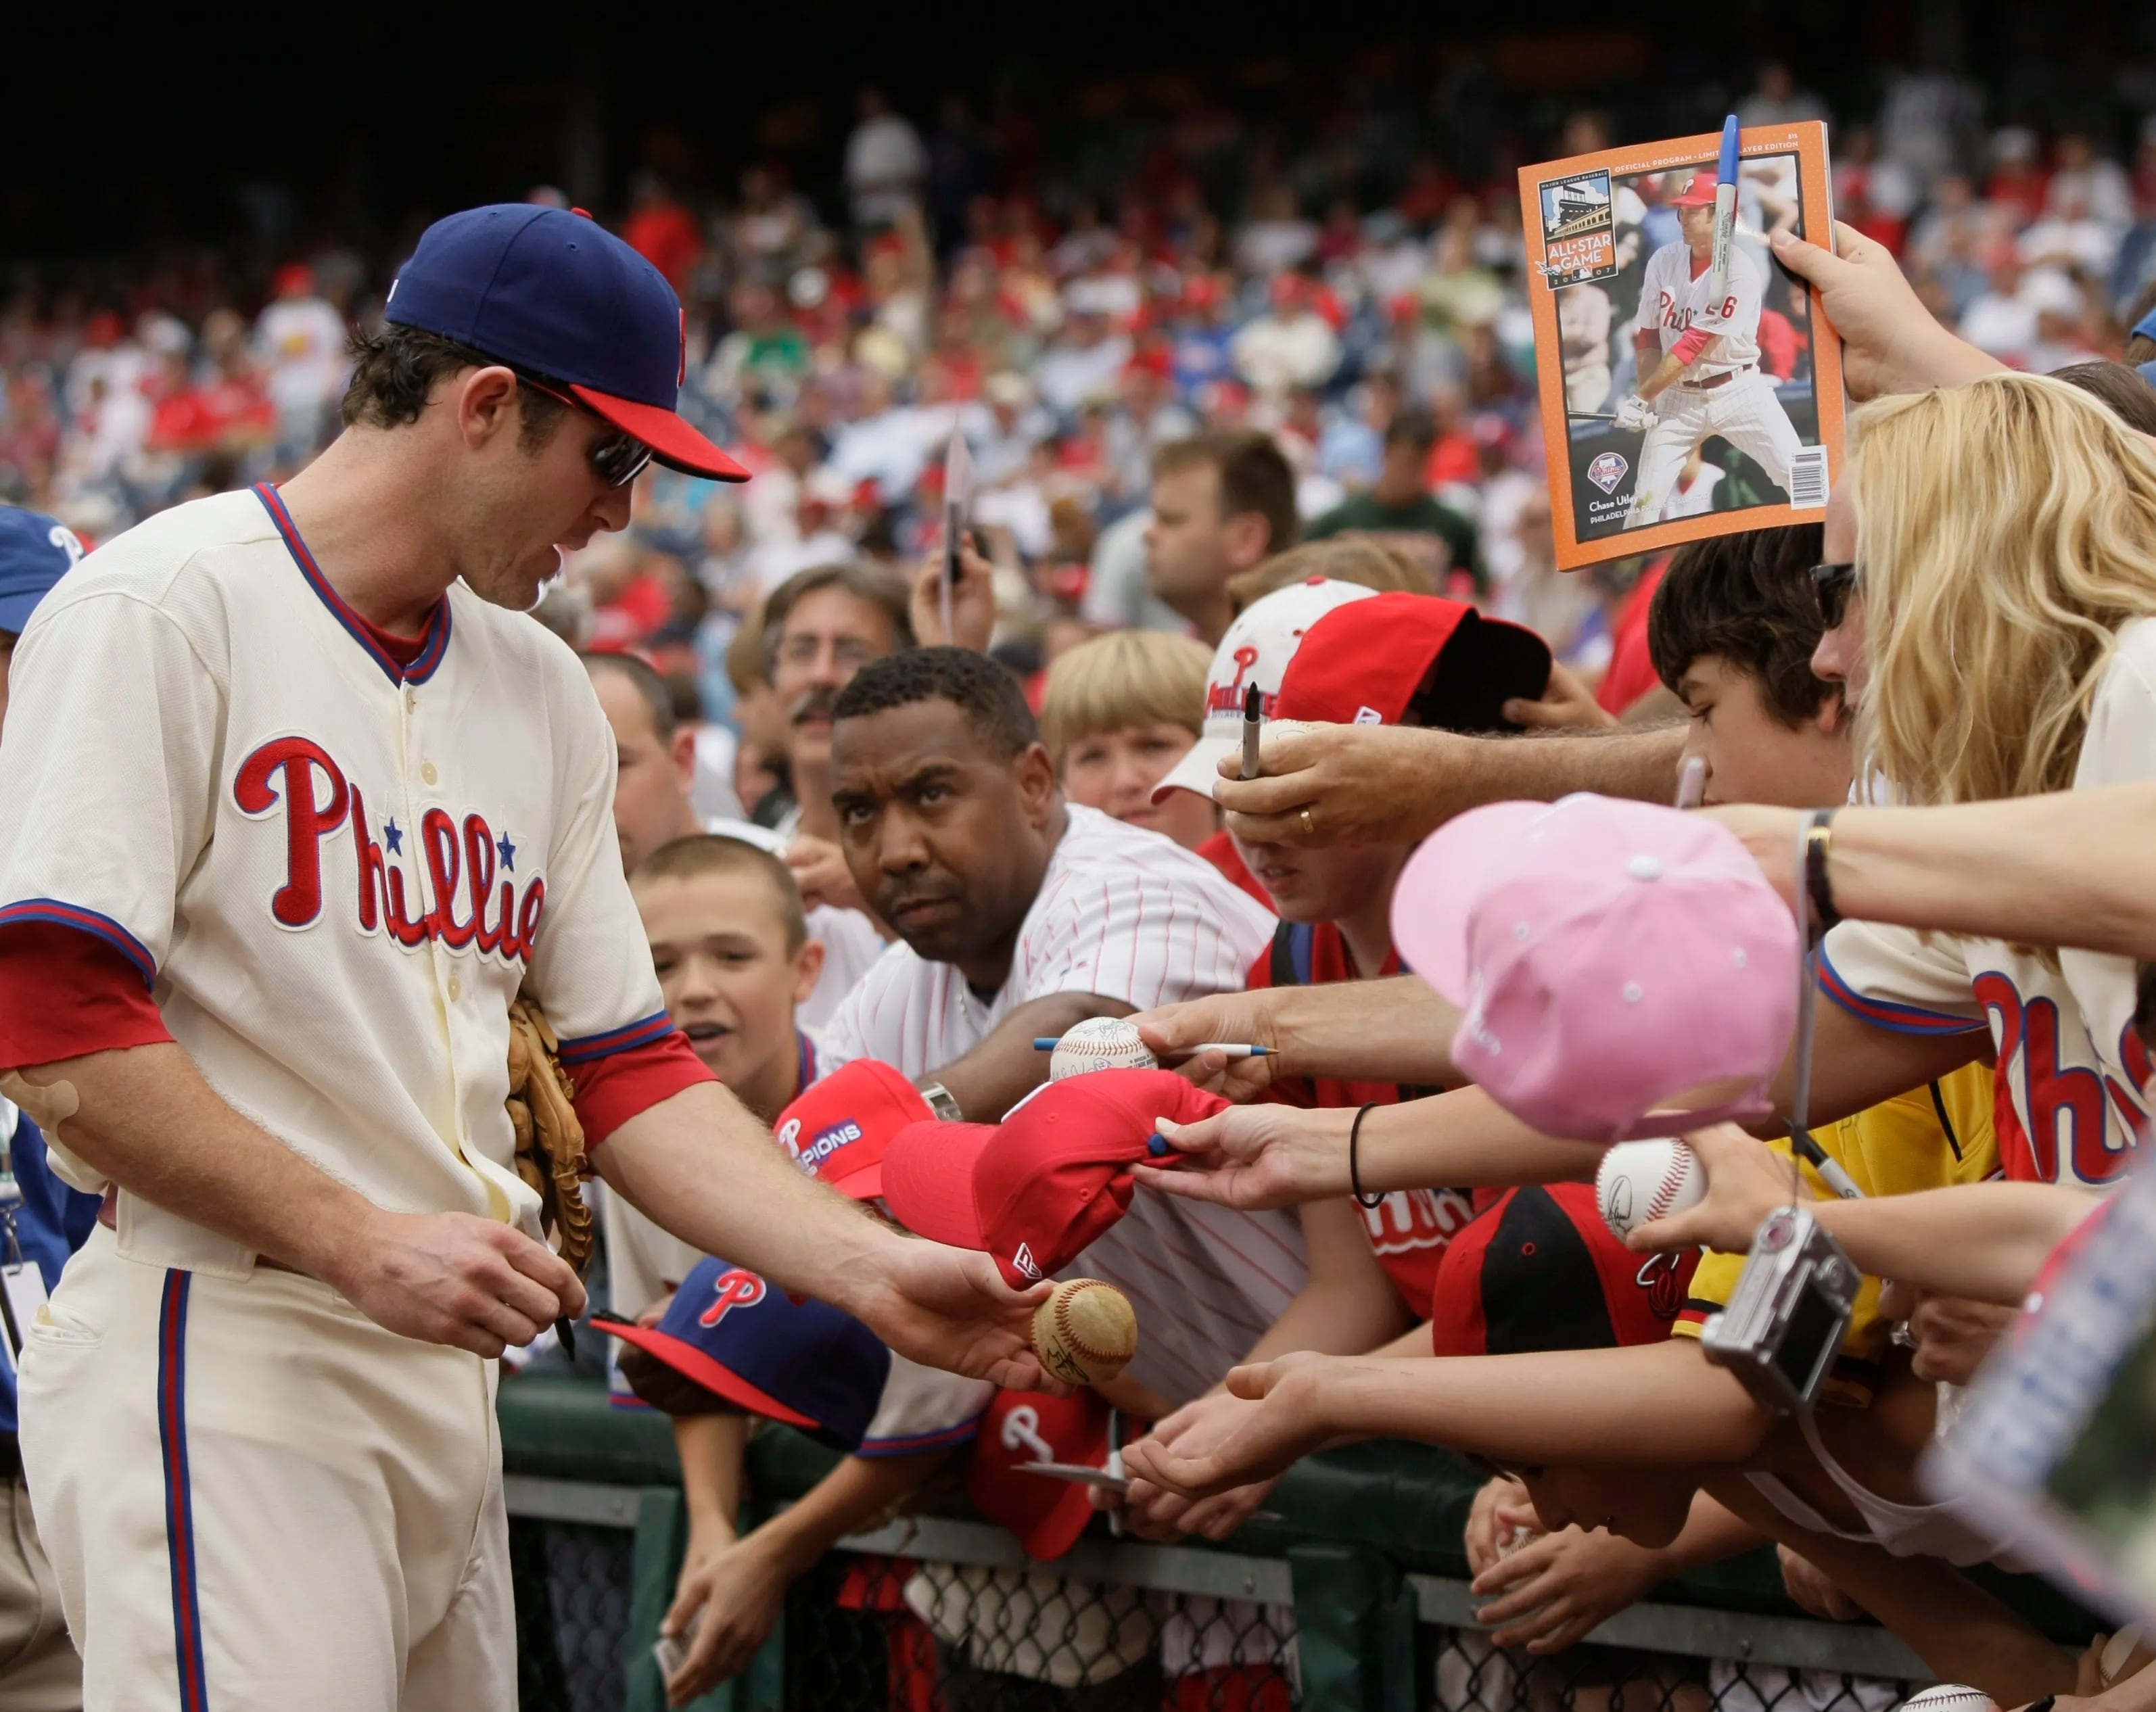 Now the Phillies and Chase Utley won't even talk about his health